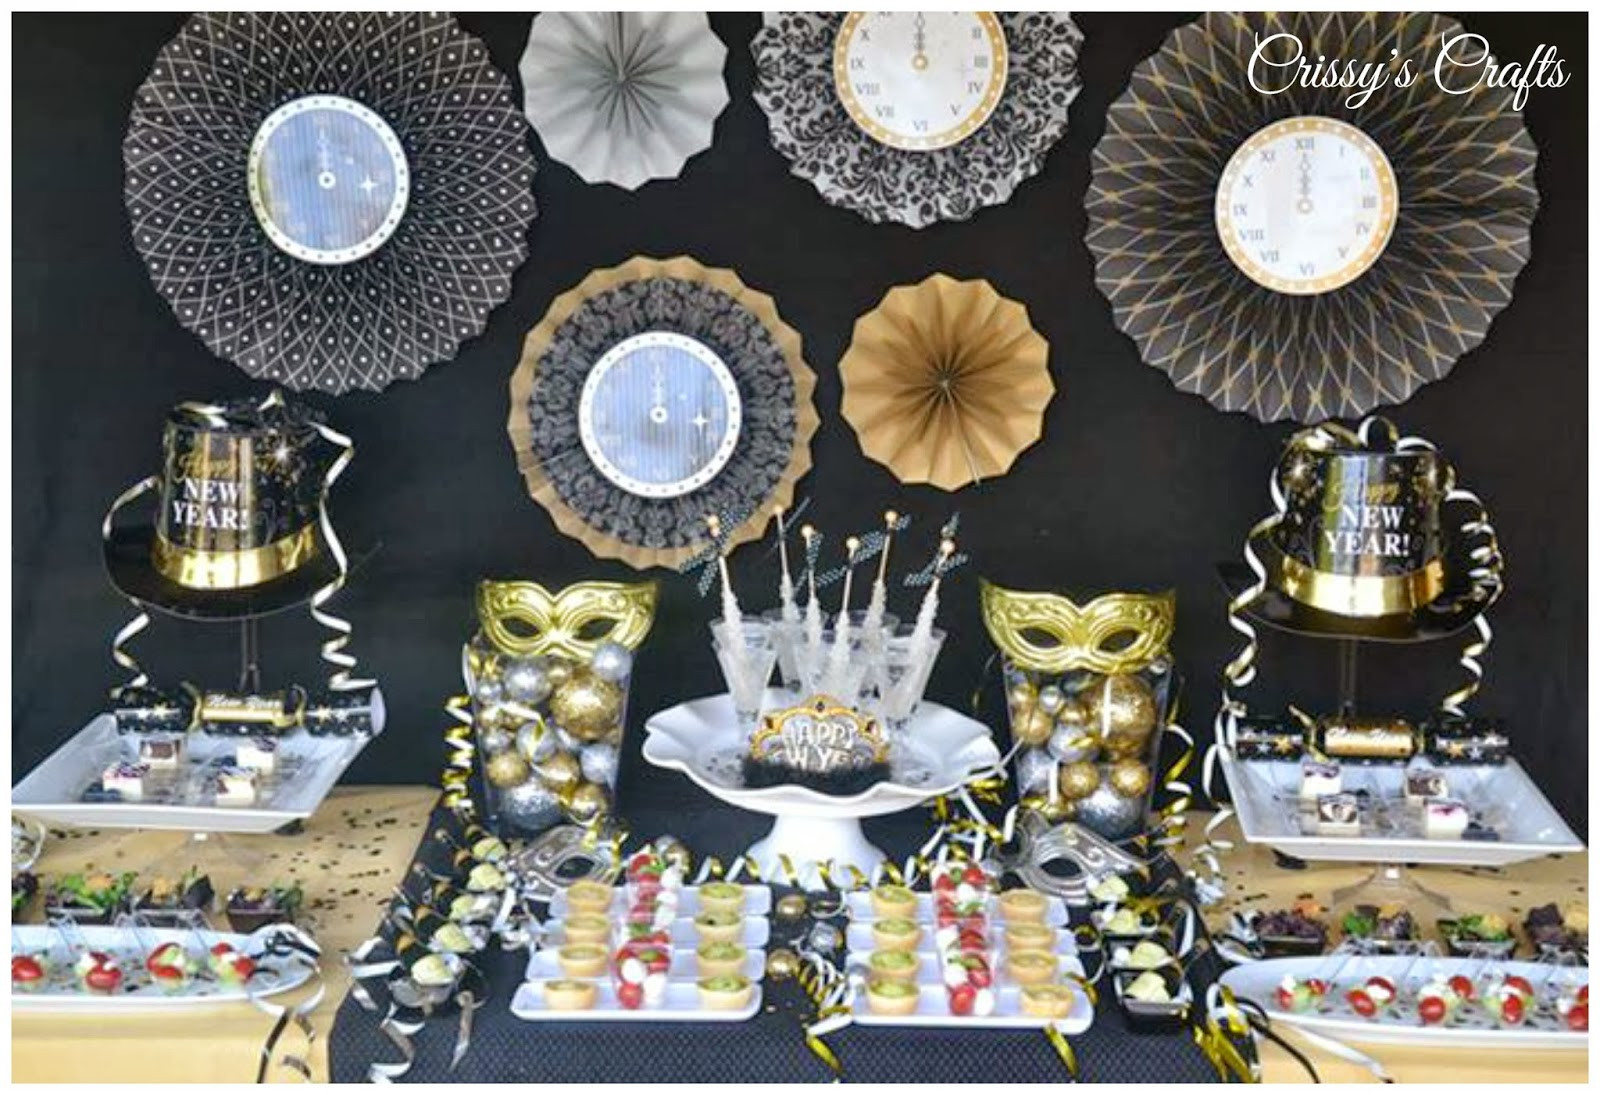 New Year Eve Themes Ideas
 Crissy s Crafts New Years Eve Party Ideas